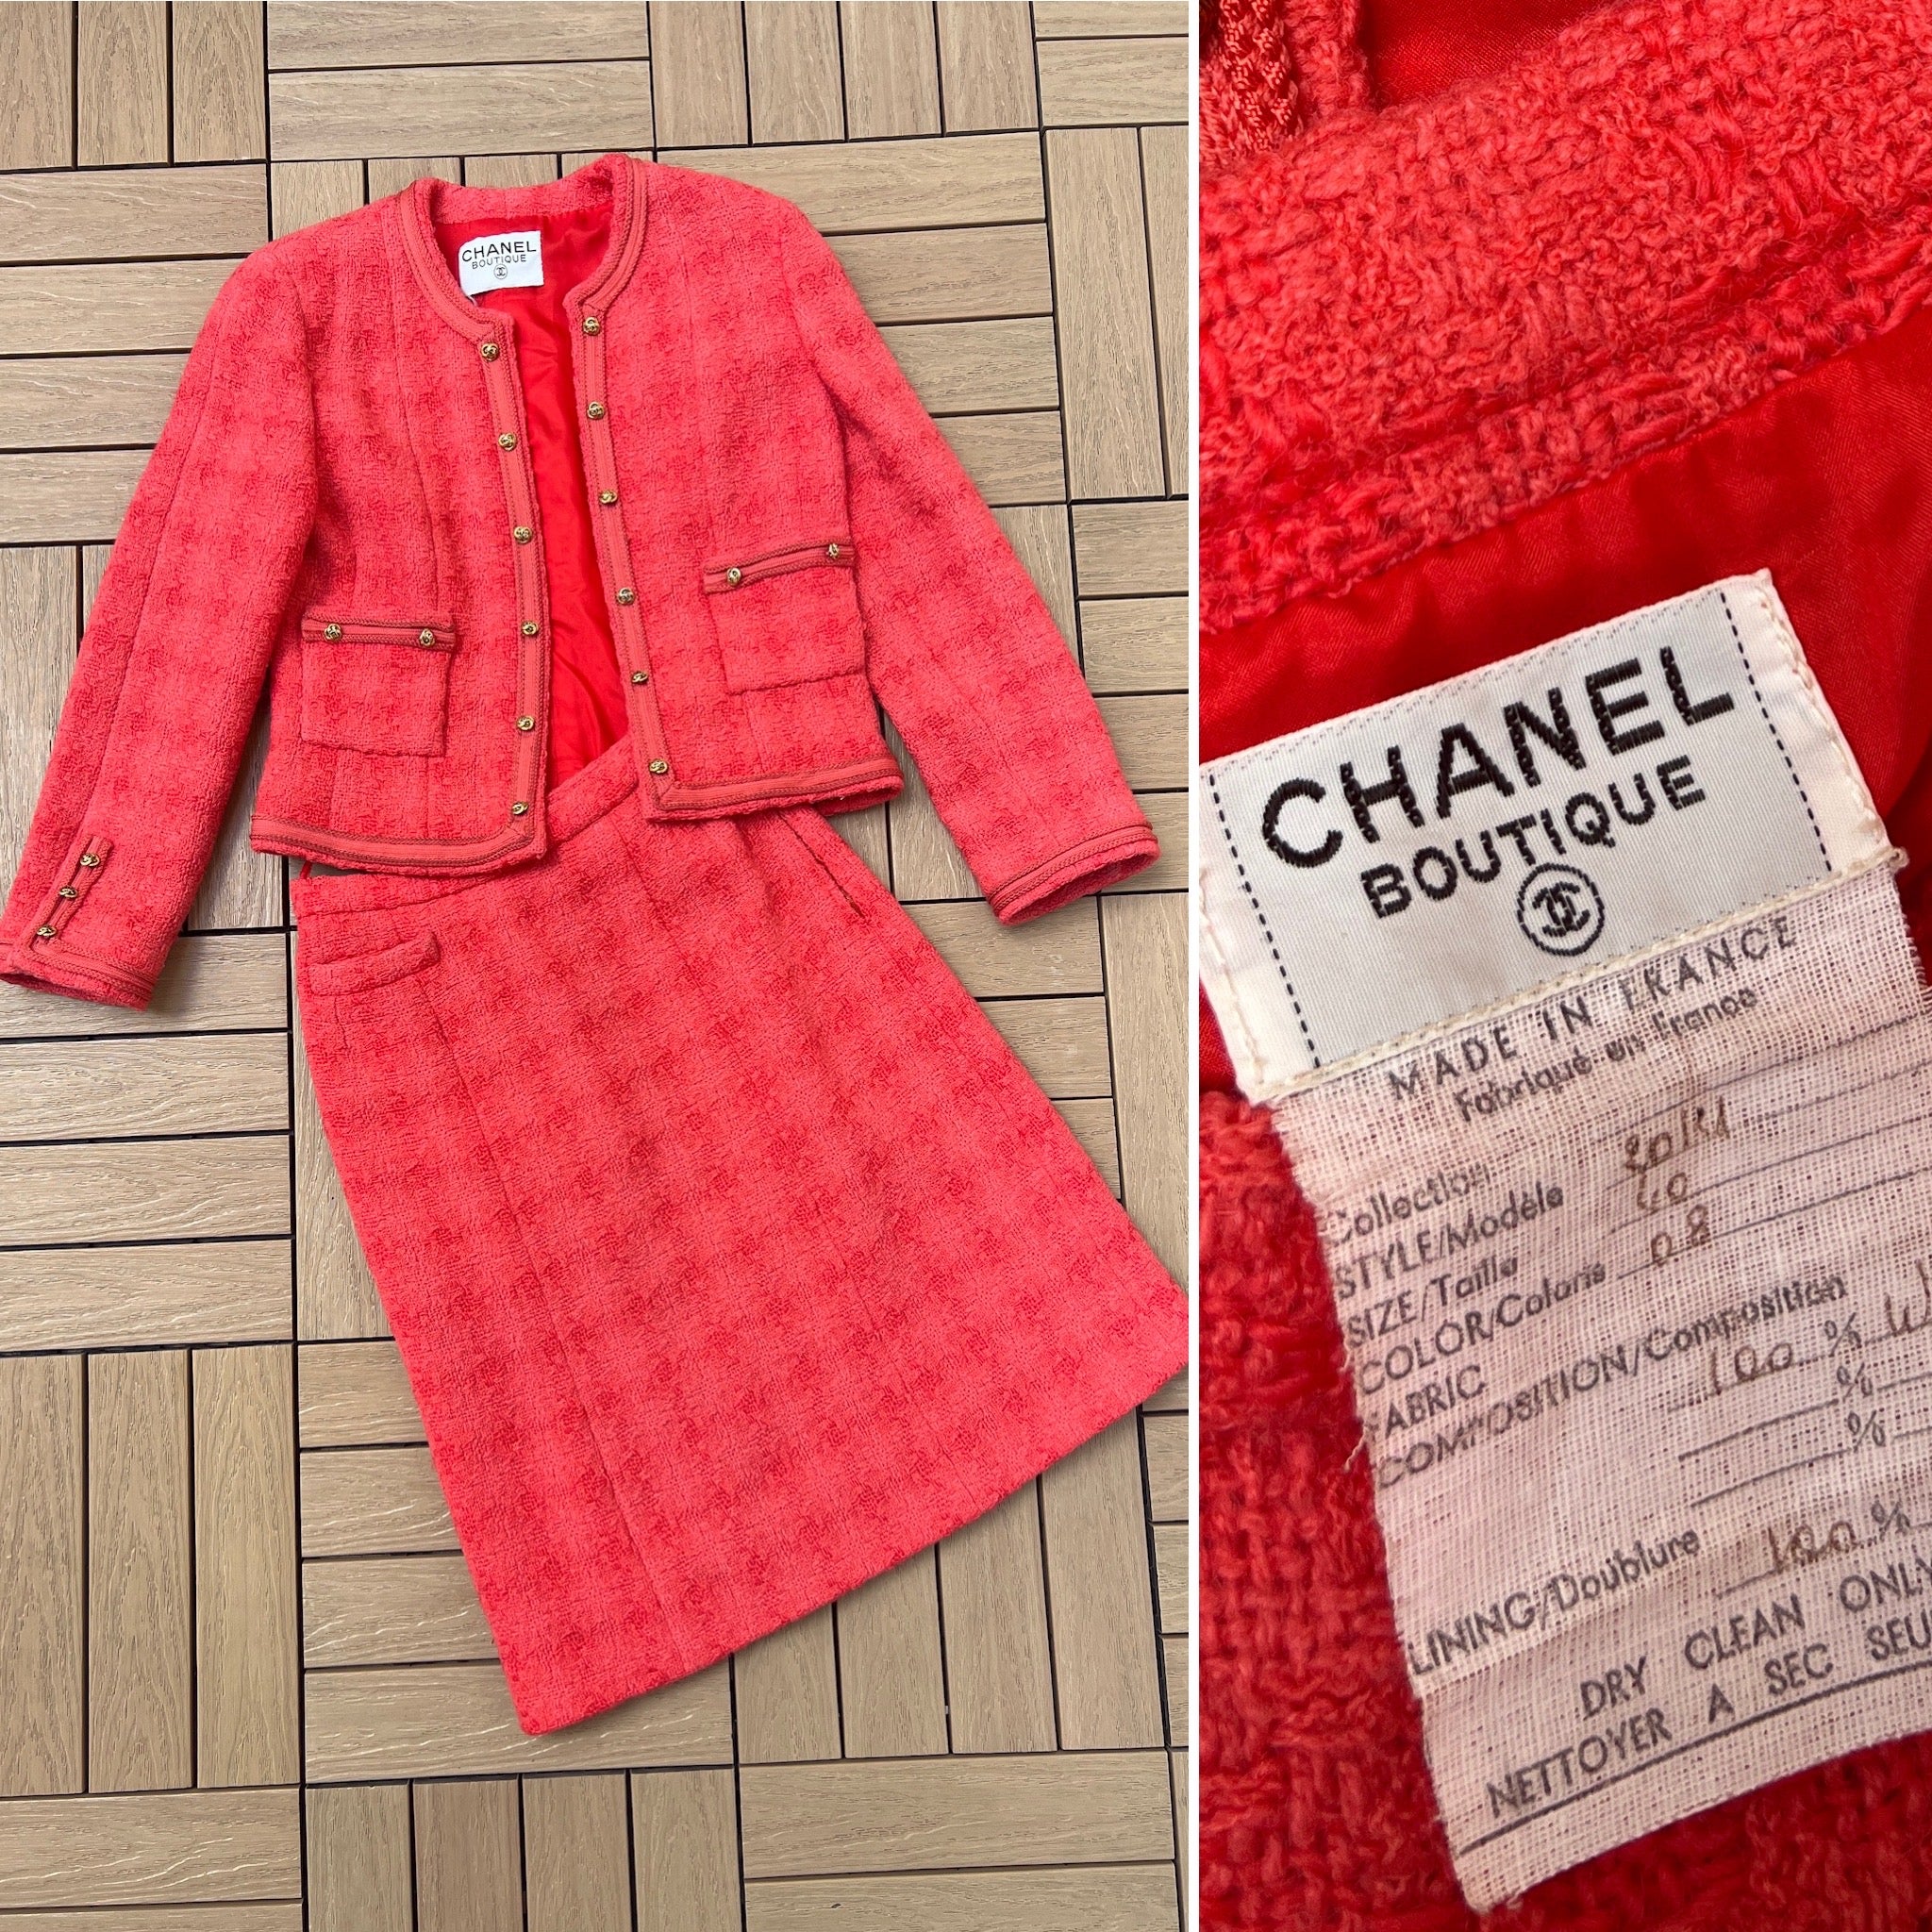 Chanel Red & Navy Wool Blend Tweed Maxi Skirt Suit 60CHX-015